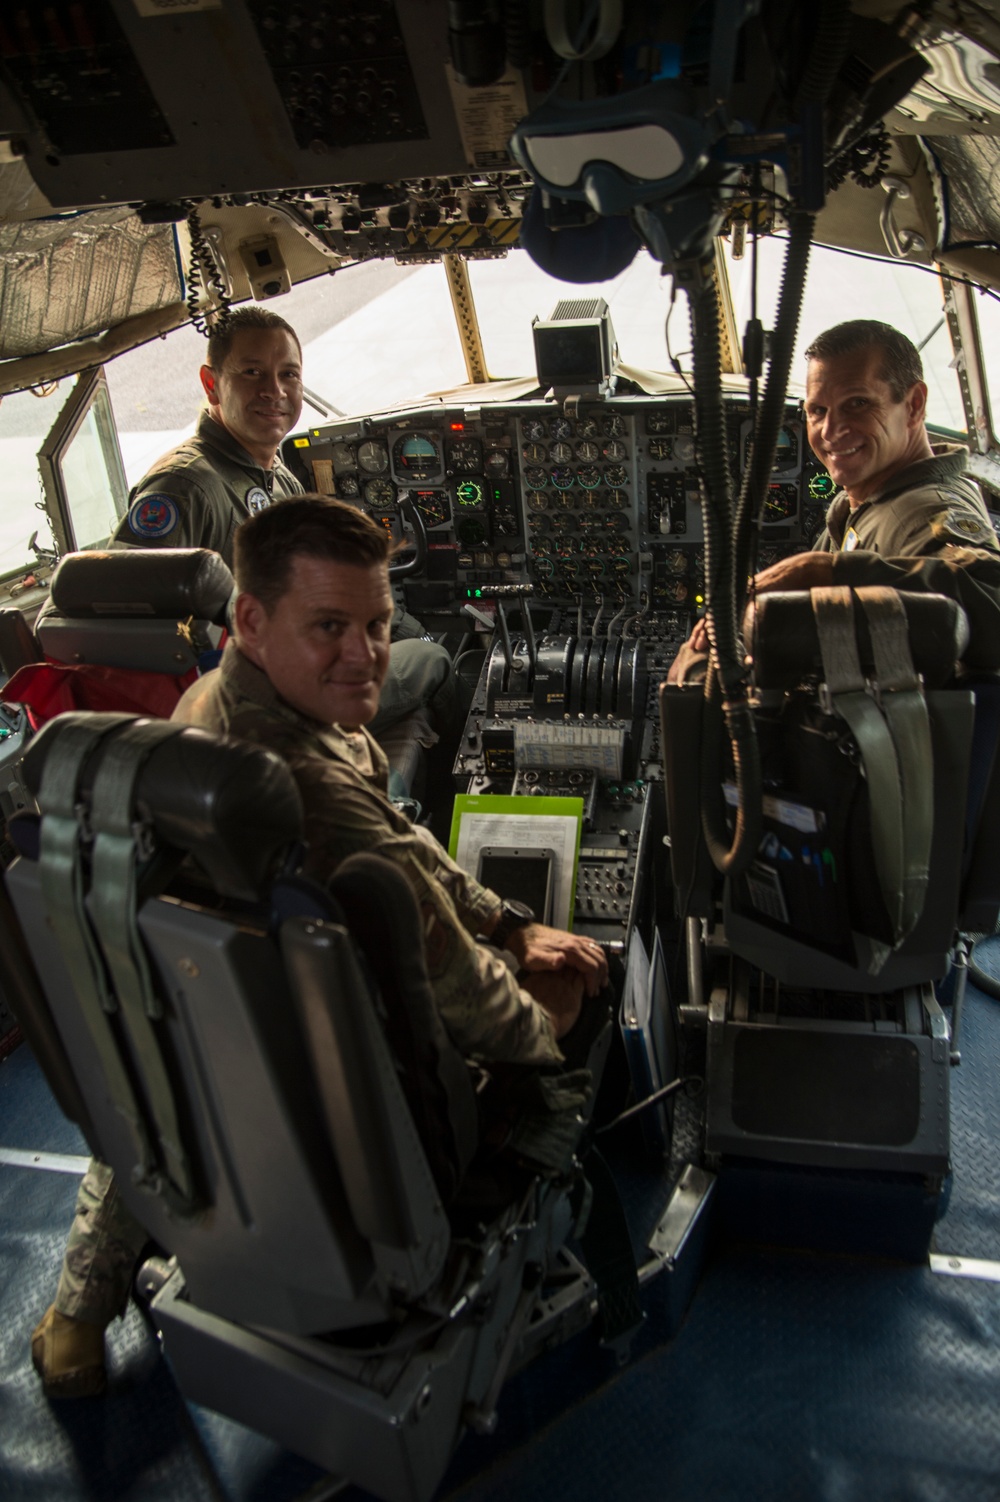 US Air Force donates C-130E Hercules to Colombia